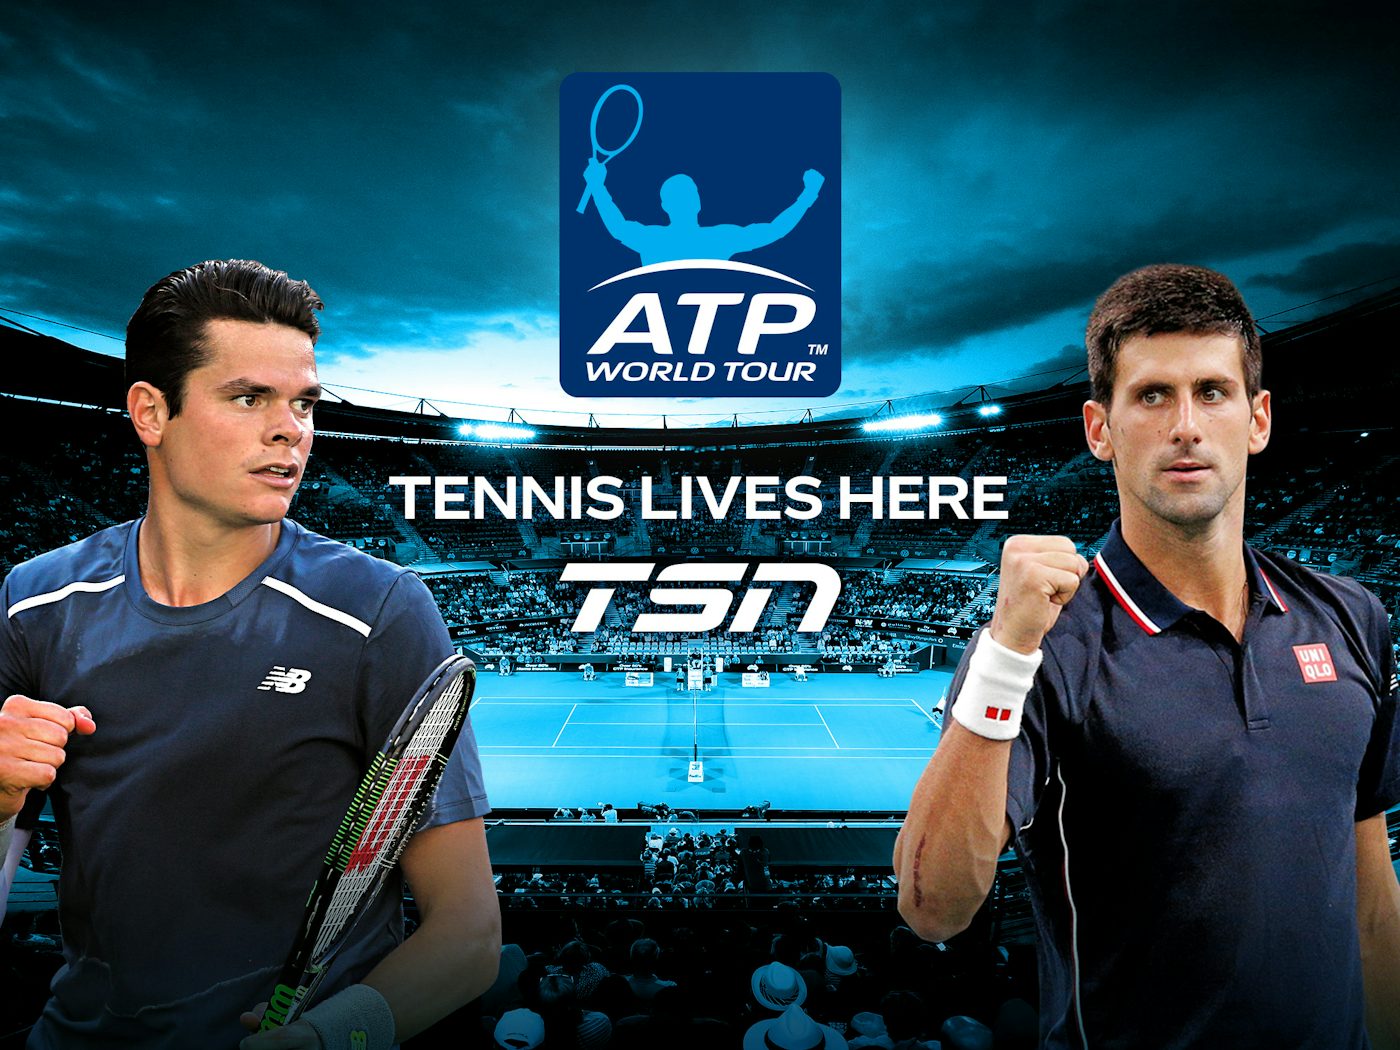 TSN Confirms Massive Slate of ATP Tennis Coverage, Kicking Off with ABN  AMRO WORLD TENNIS TOURNAMENT from Rotterdam, Beginning Today - Bell Media